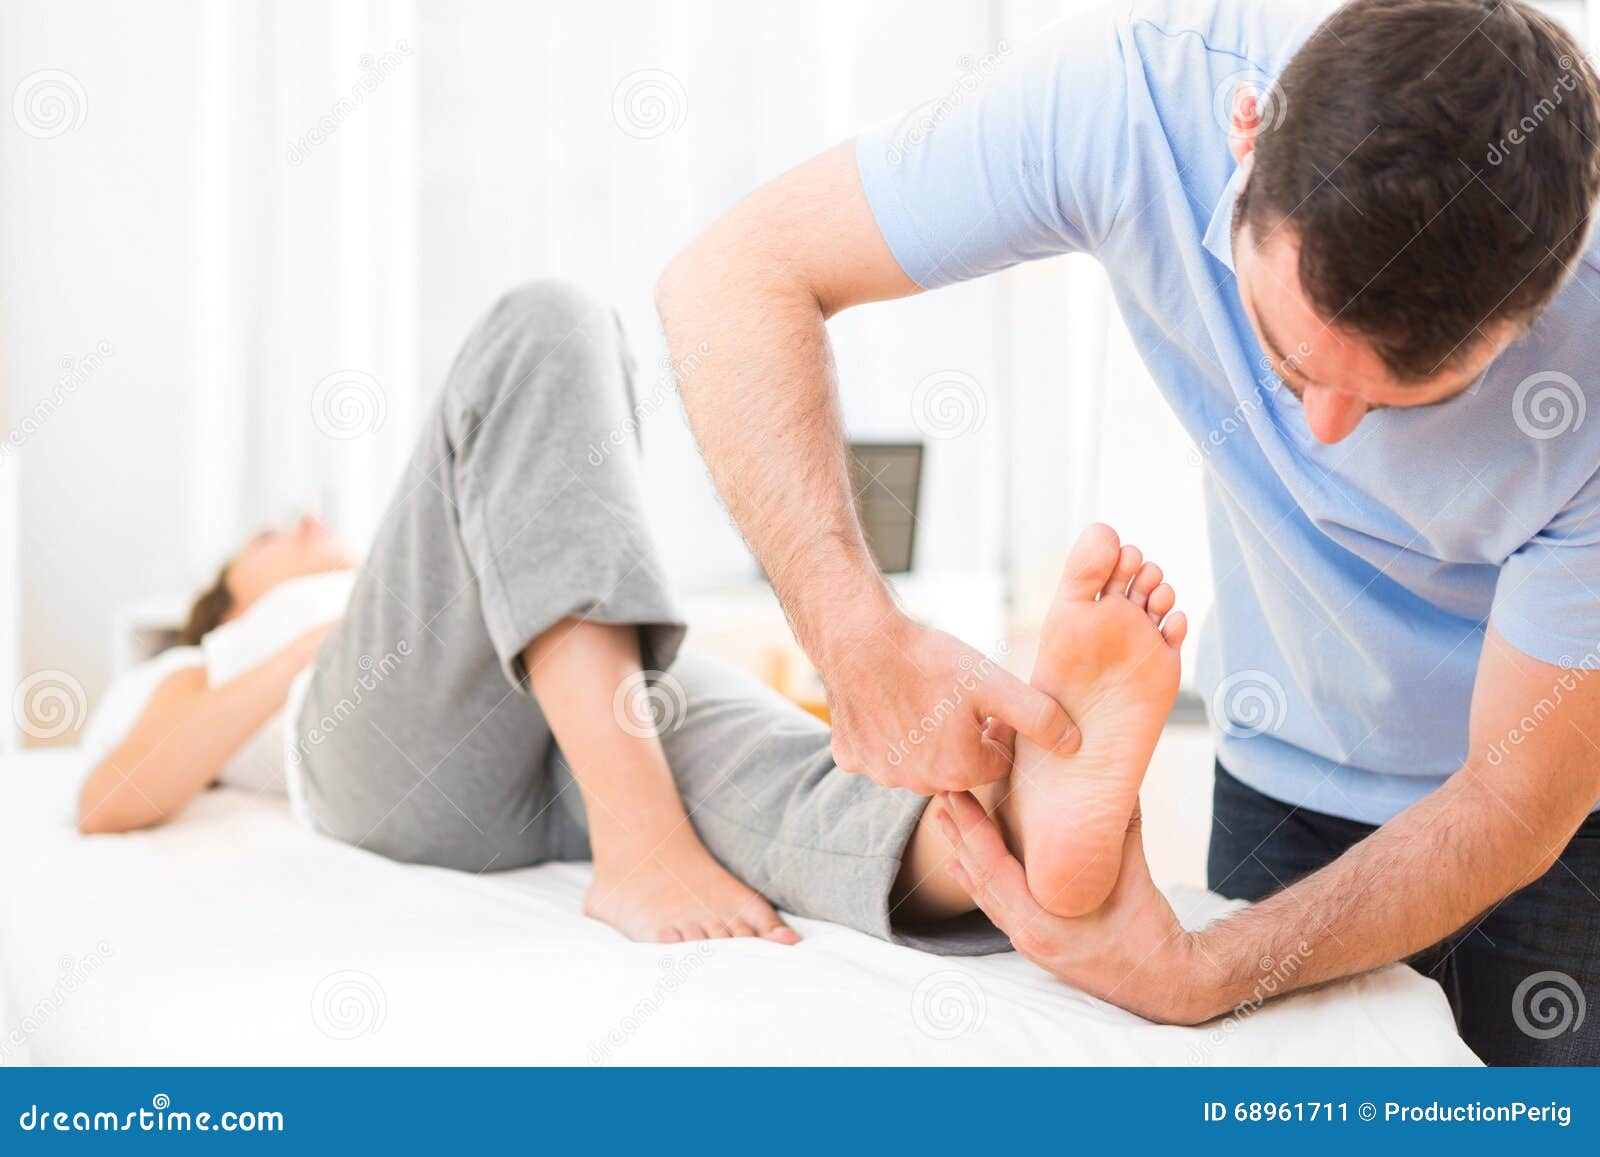 young attractive physiotherapist doing reflexology on a patient